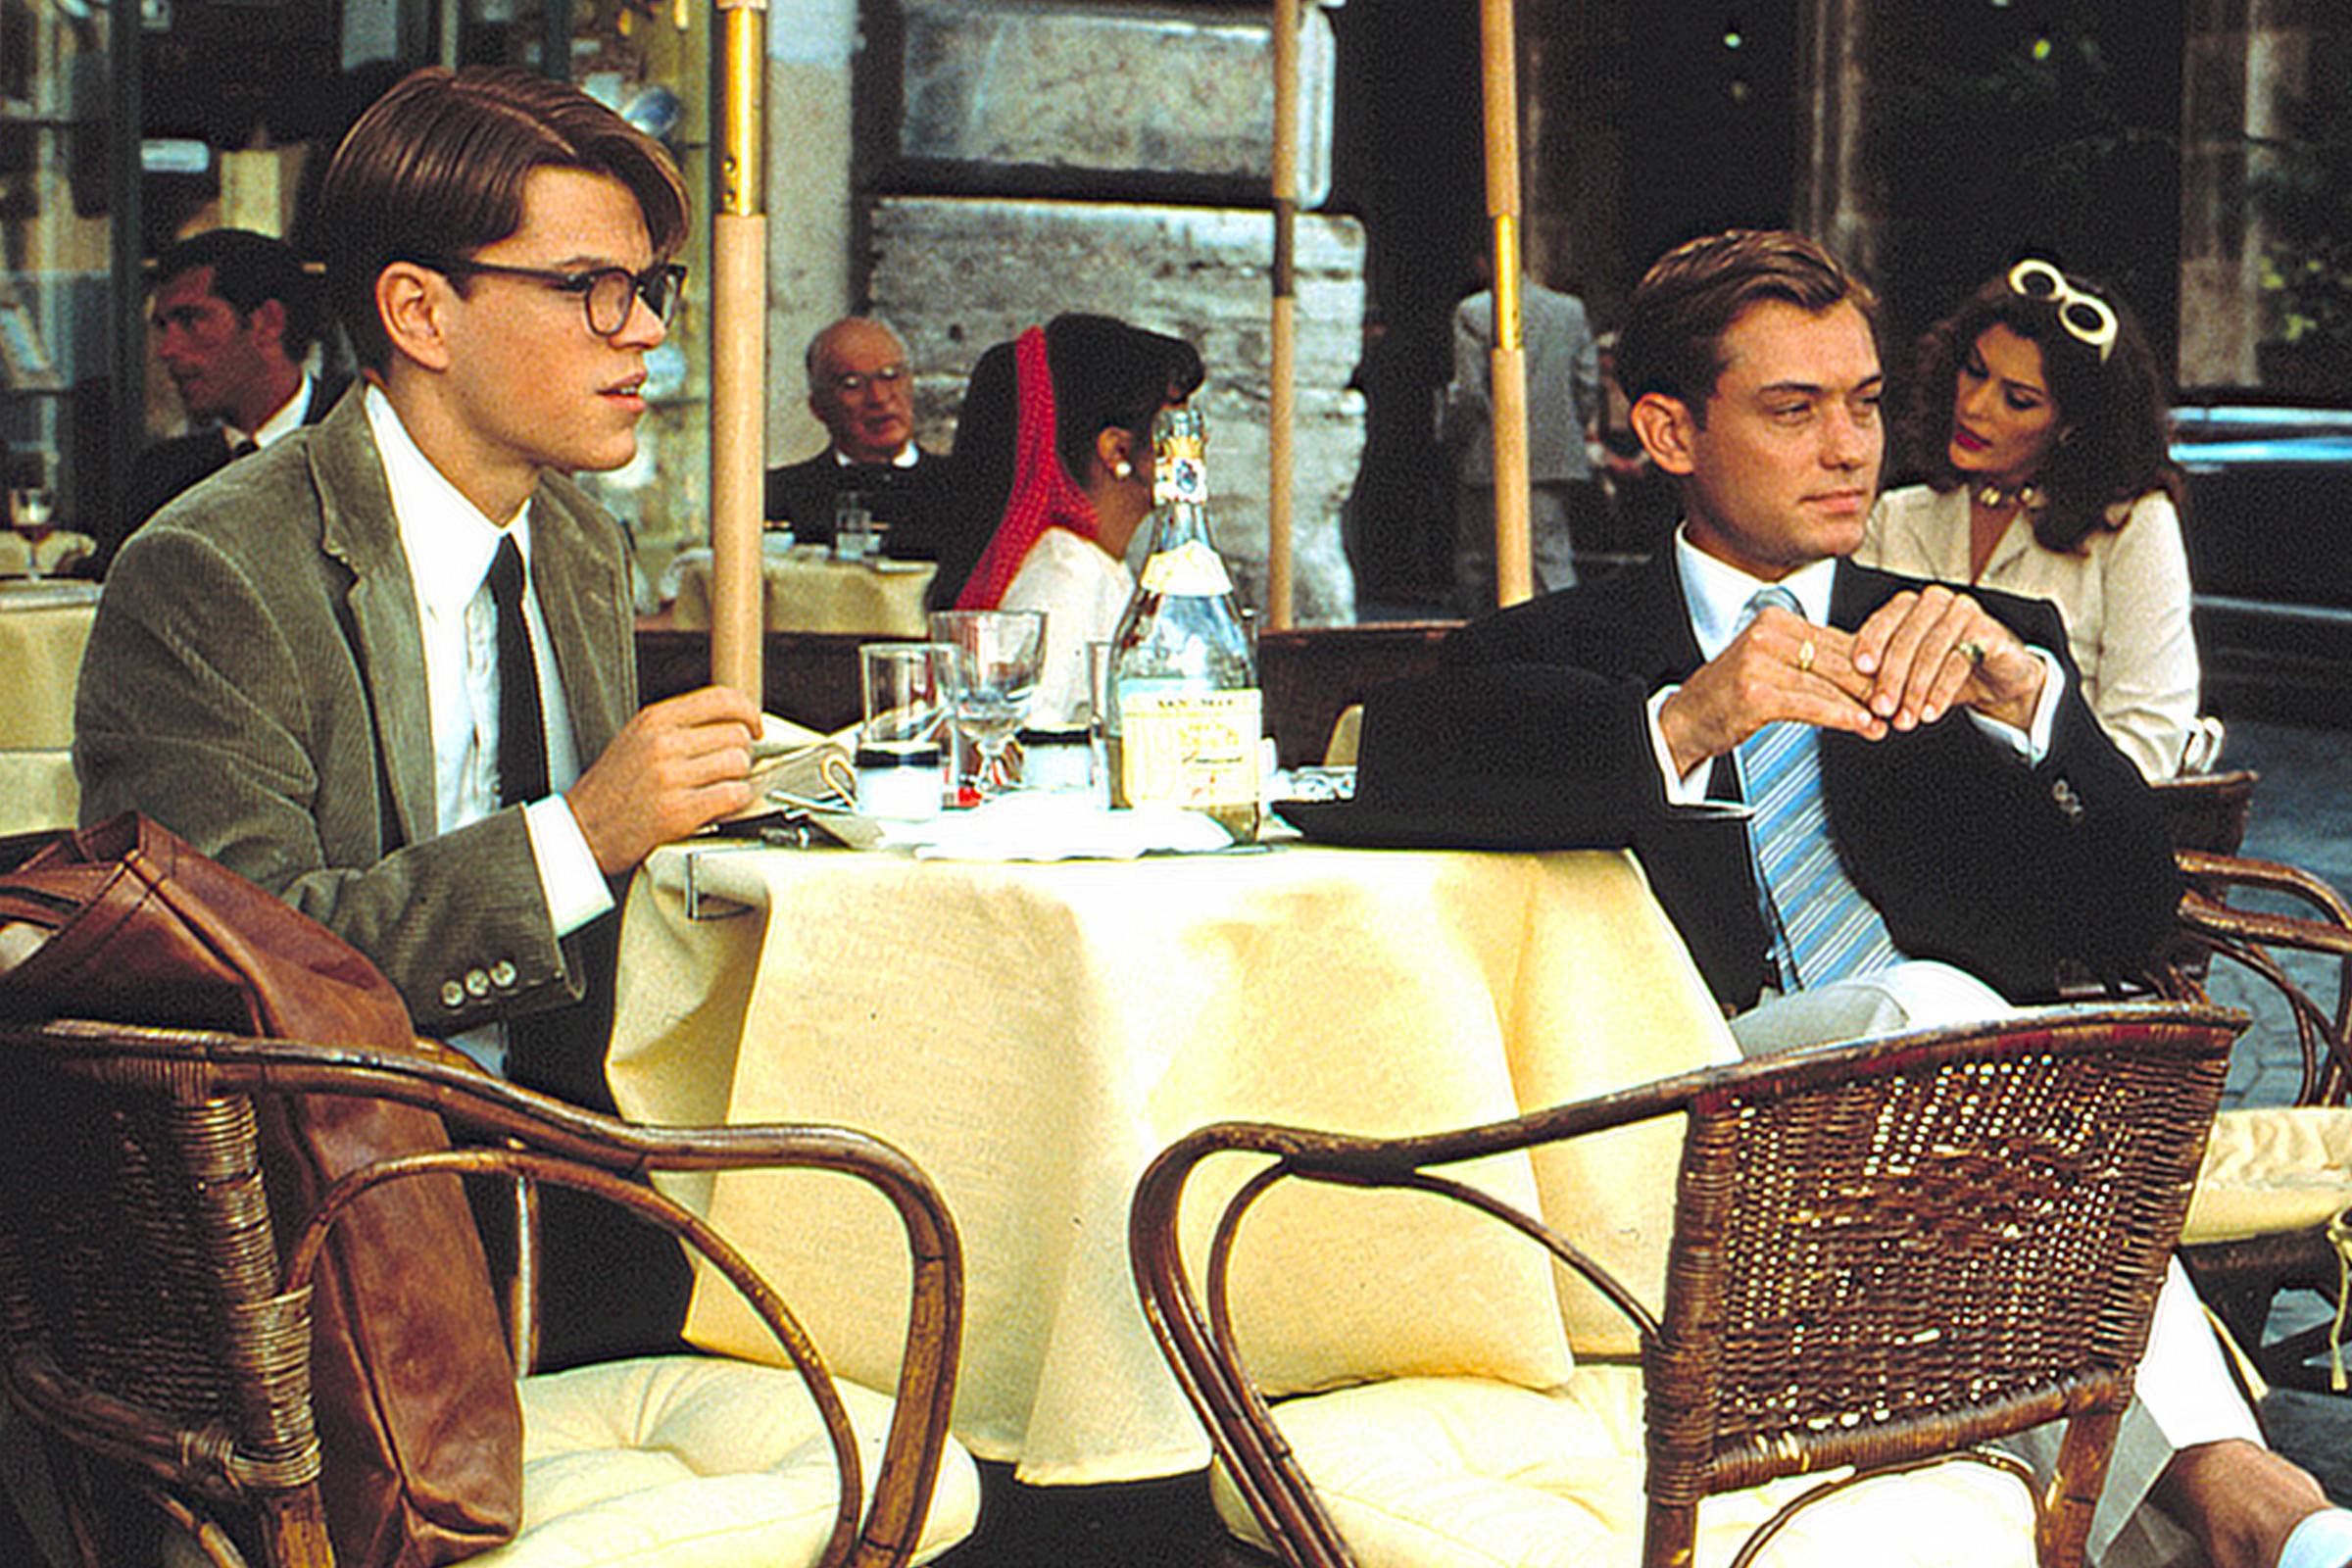 Inspired: The Talented Mr. Ripley, by The Blonde Velvet